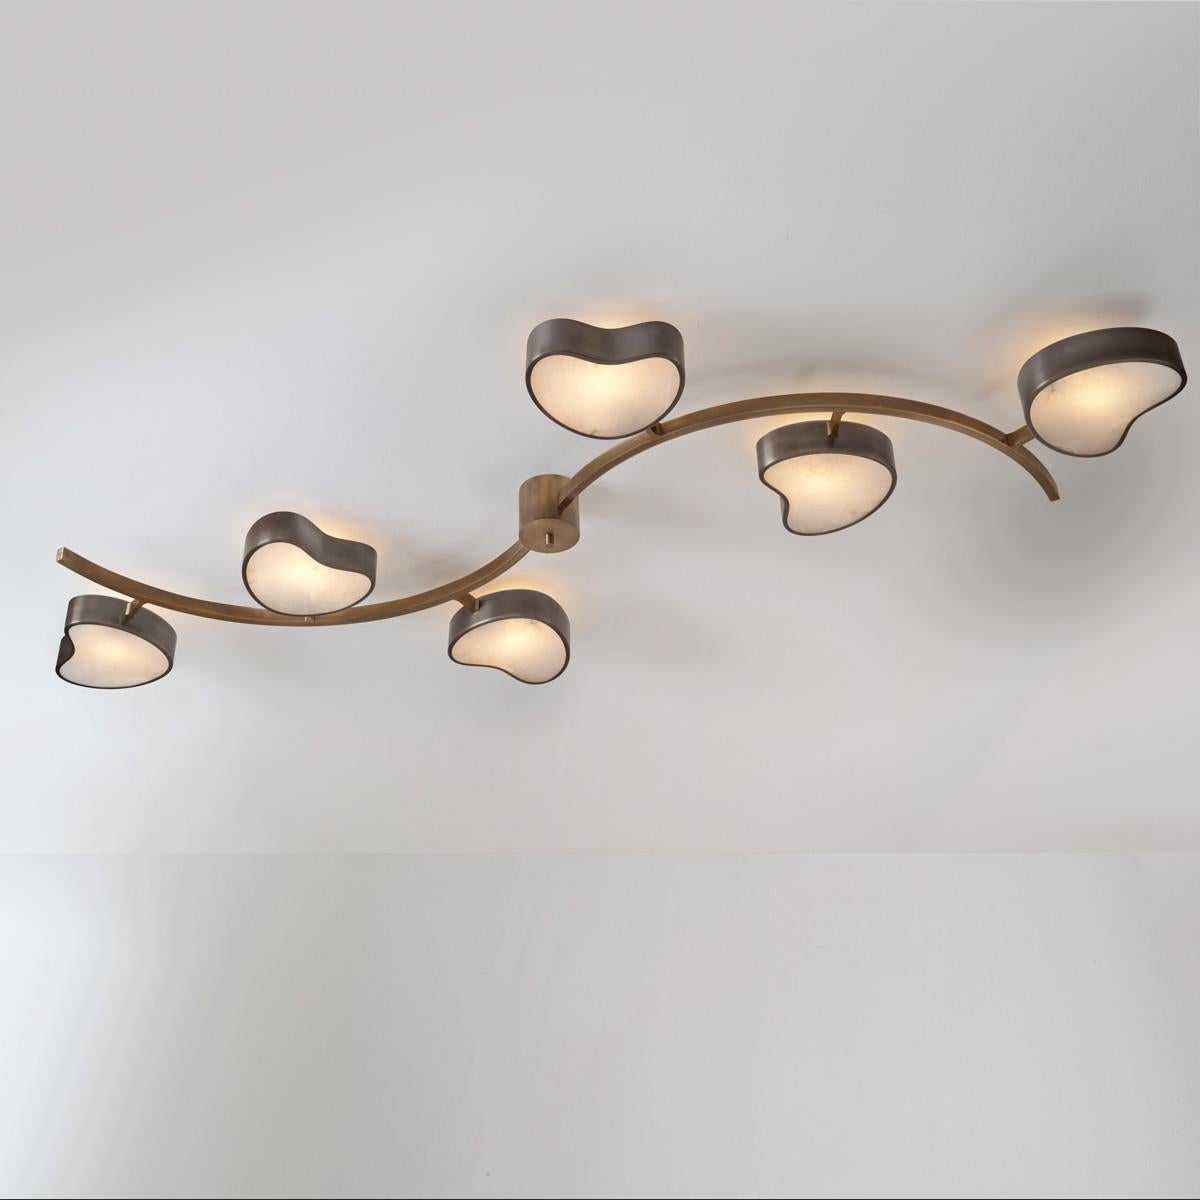 Cuore N.6 Ceiling Light by Gaspare Asaro. Bronze and Satin Brass Finish For Sale 5